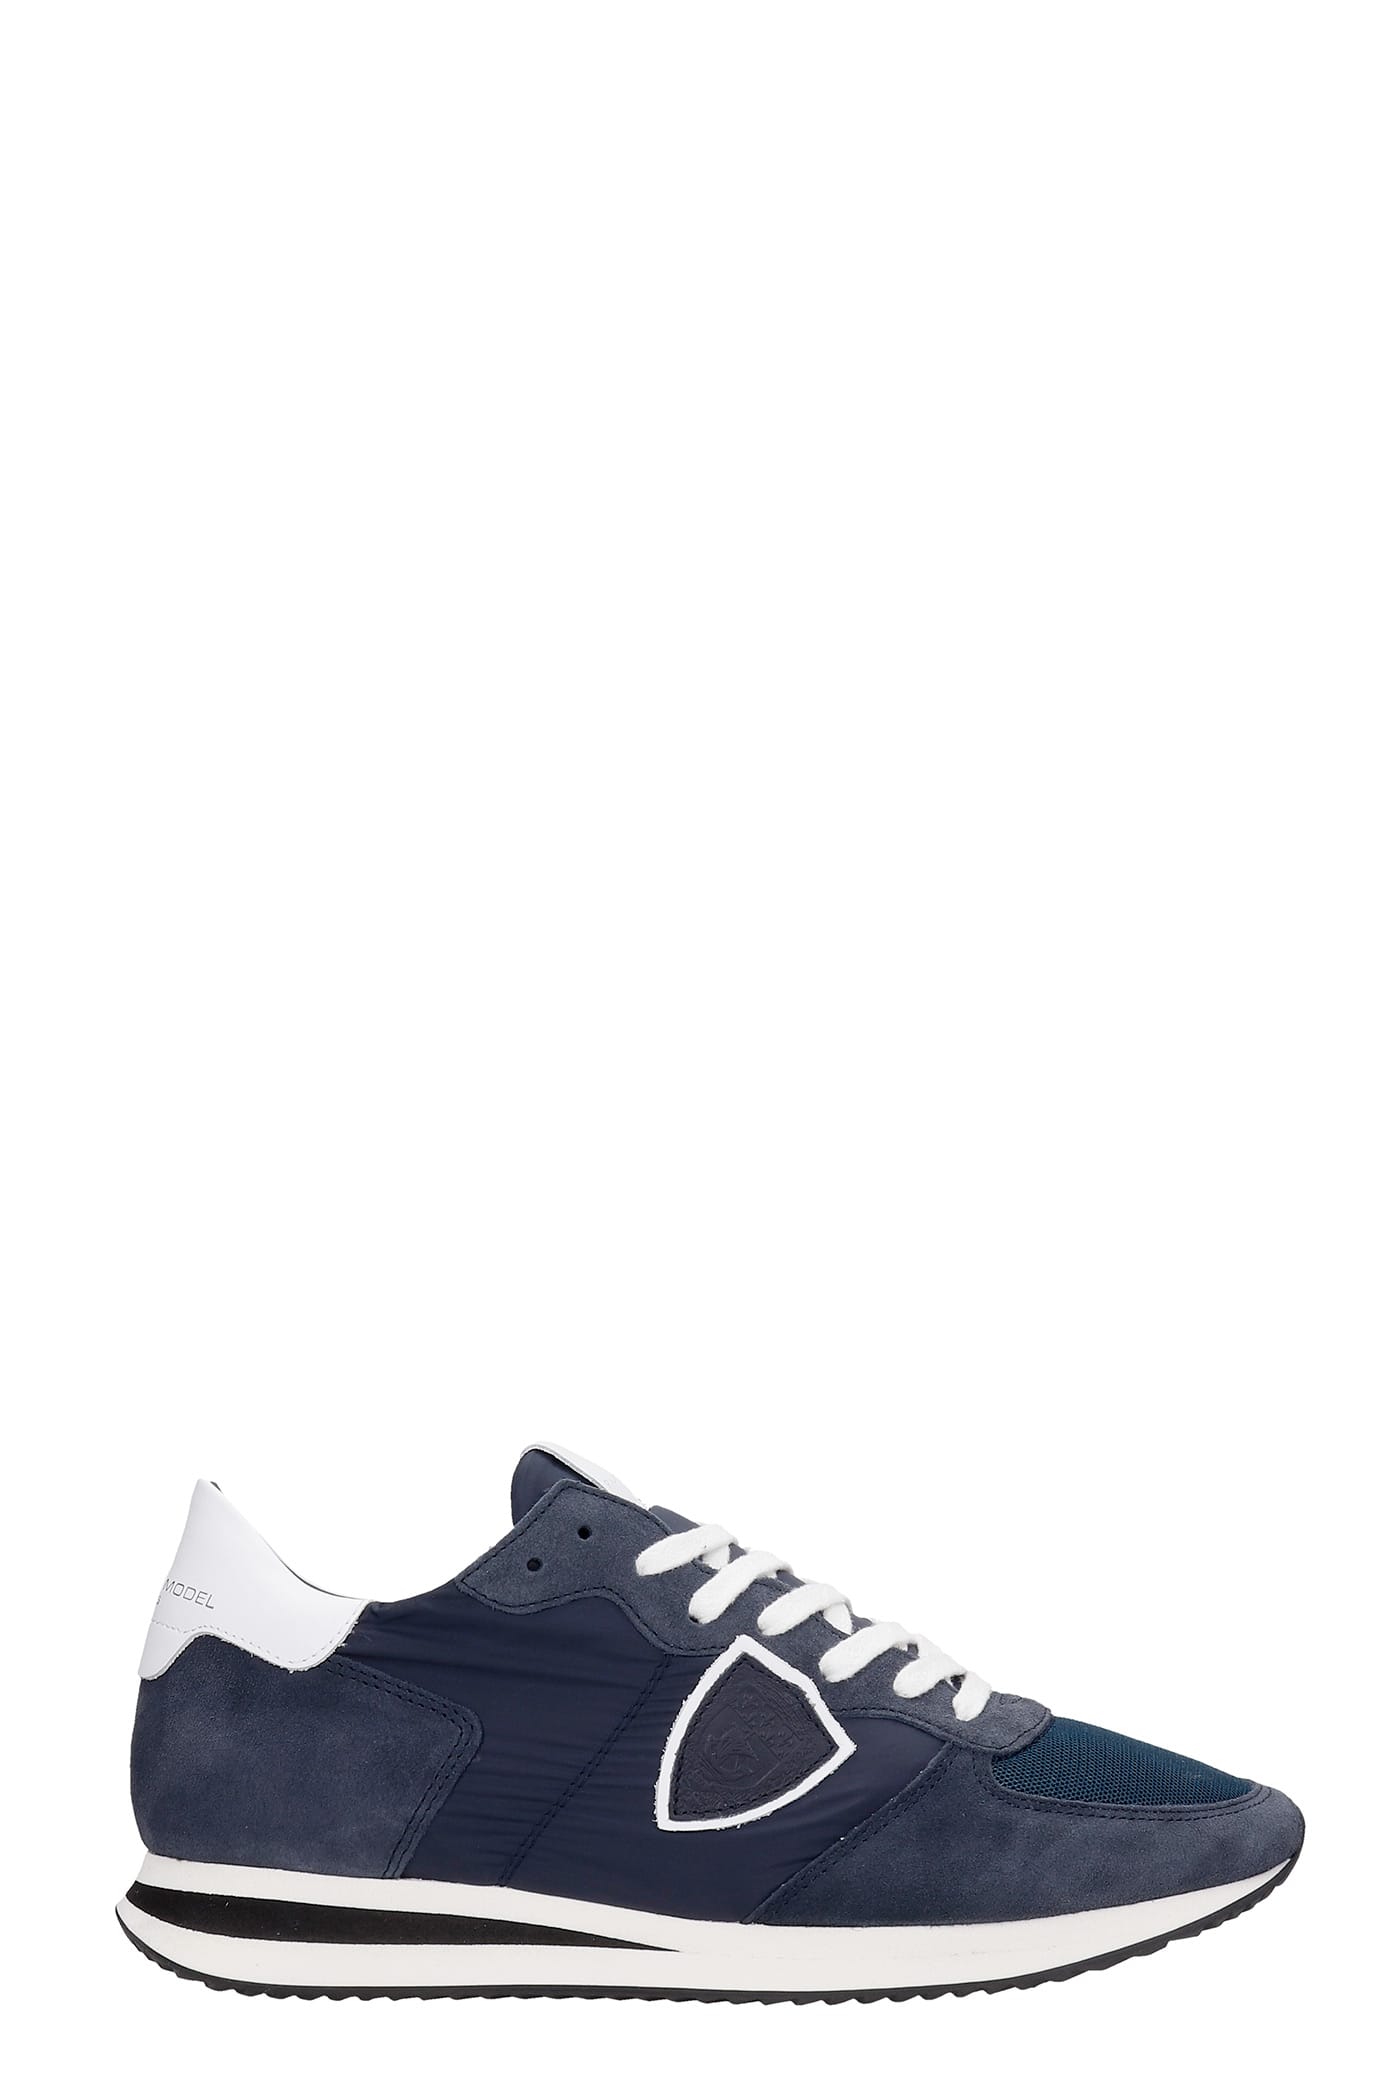 Philippe Model Trpx Sneakers In Blue Suede And Fabric